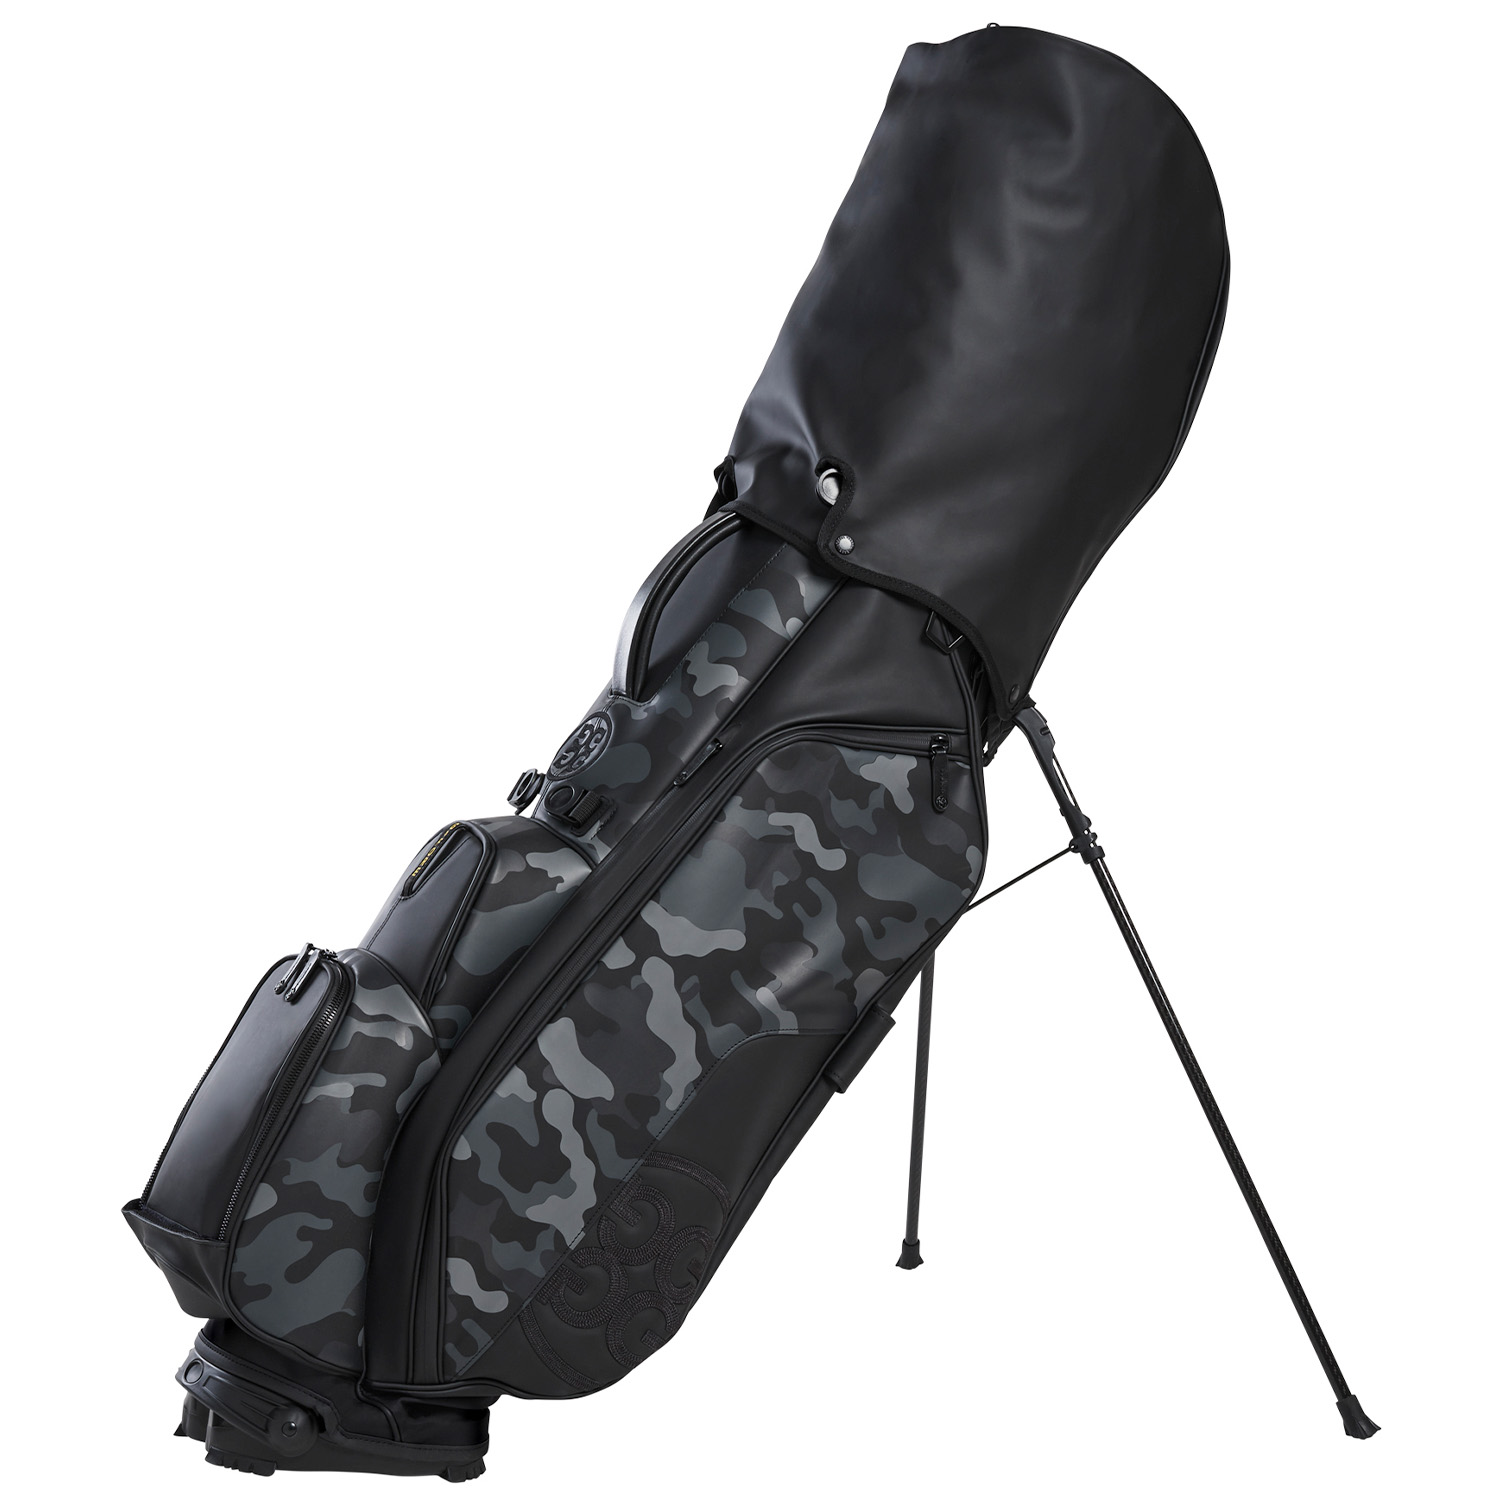 G/FORE Transporter III Tour Carry Stand Golf Bag Ltd Edition - Onyx